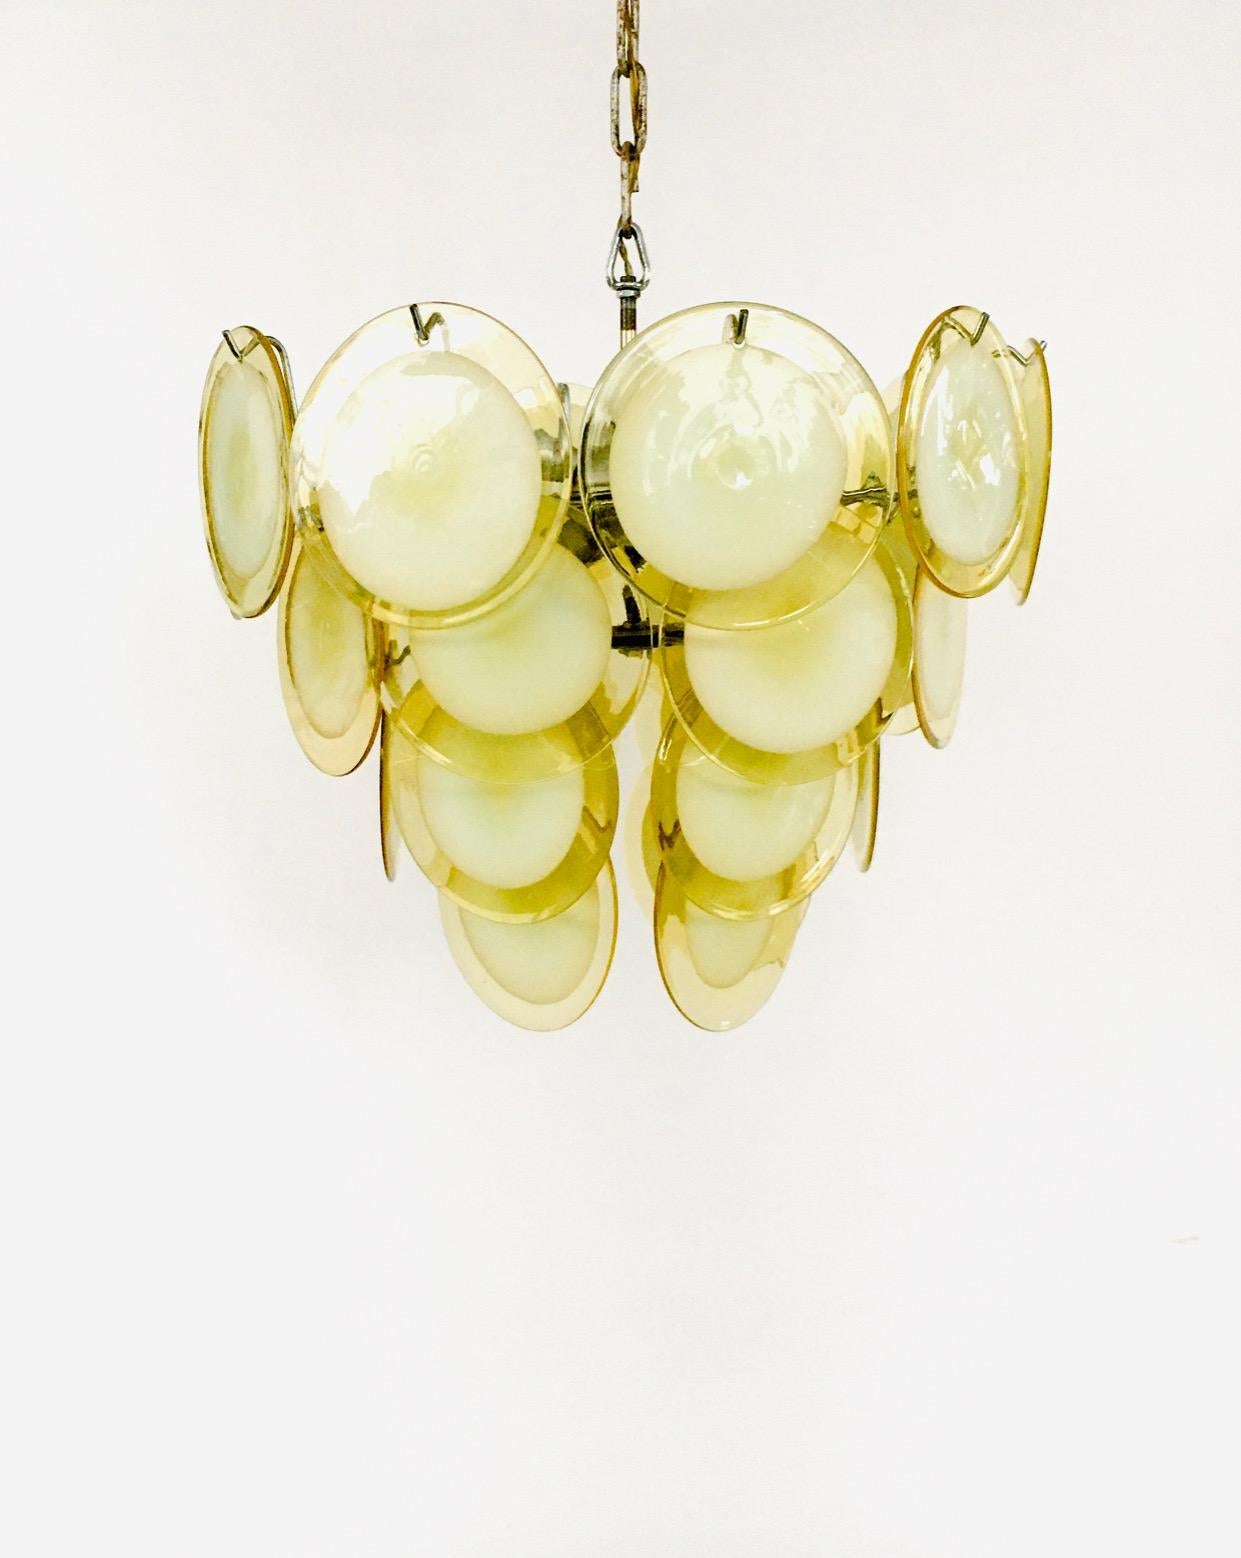 Vintage Midcentury Italian Design Venetian Murano Glass Disc Chandelier by Gino Vistosi for Venini or Mazzega. Made in Italy, Murano, 1960's. Majestic all original classic Murano pendant lamp. Made up of 4 layers with in total 28 amber yellow